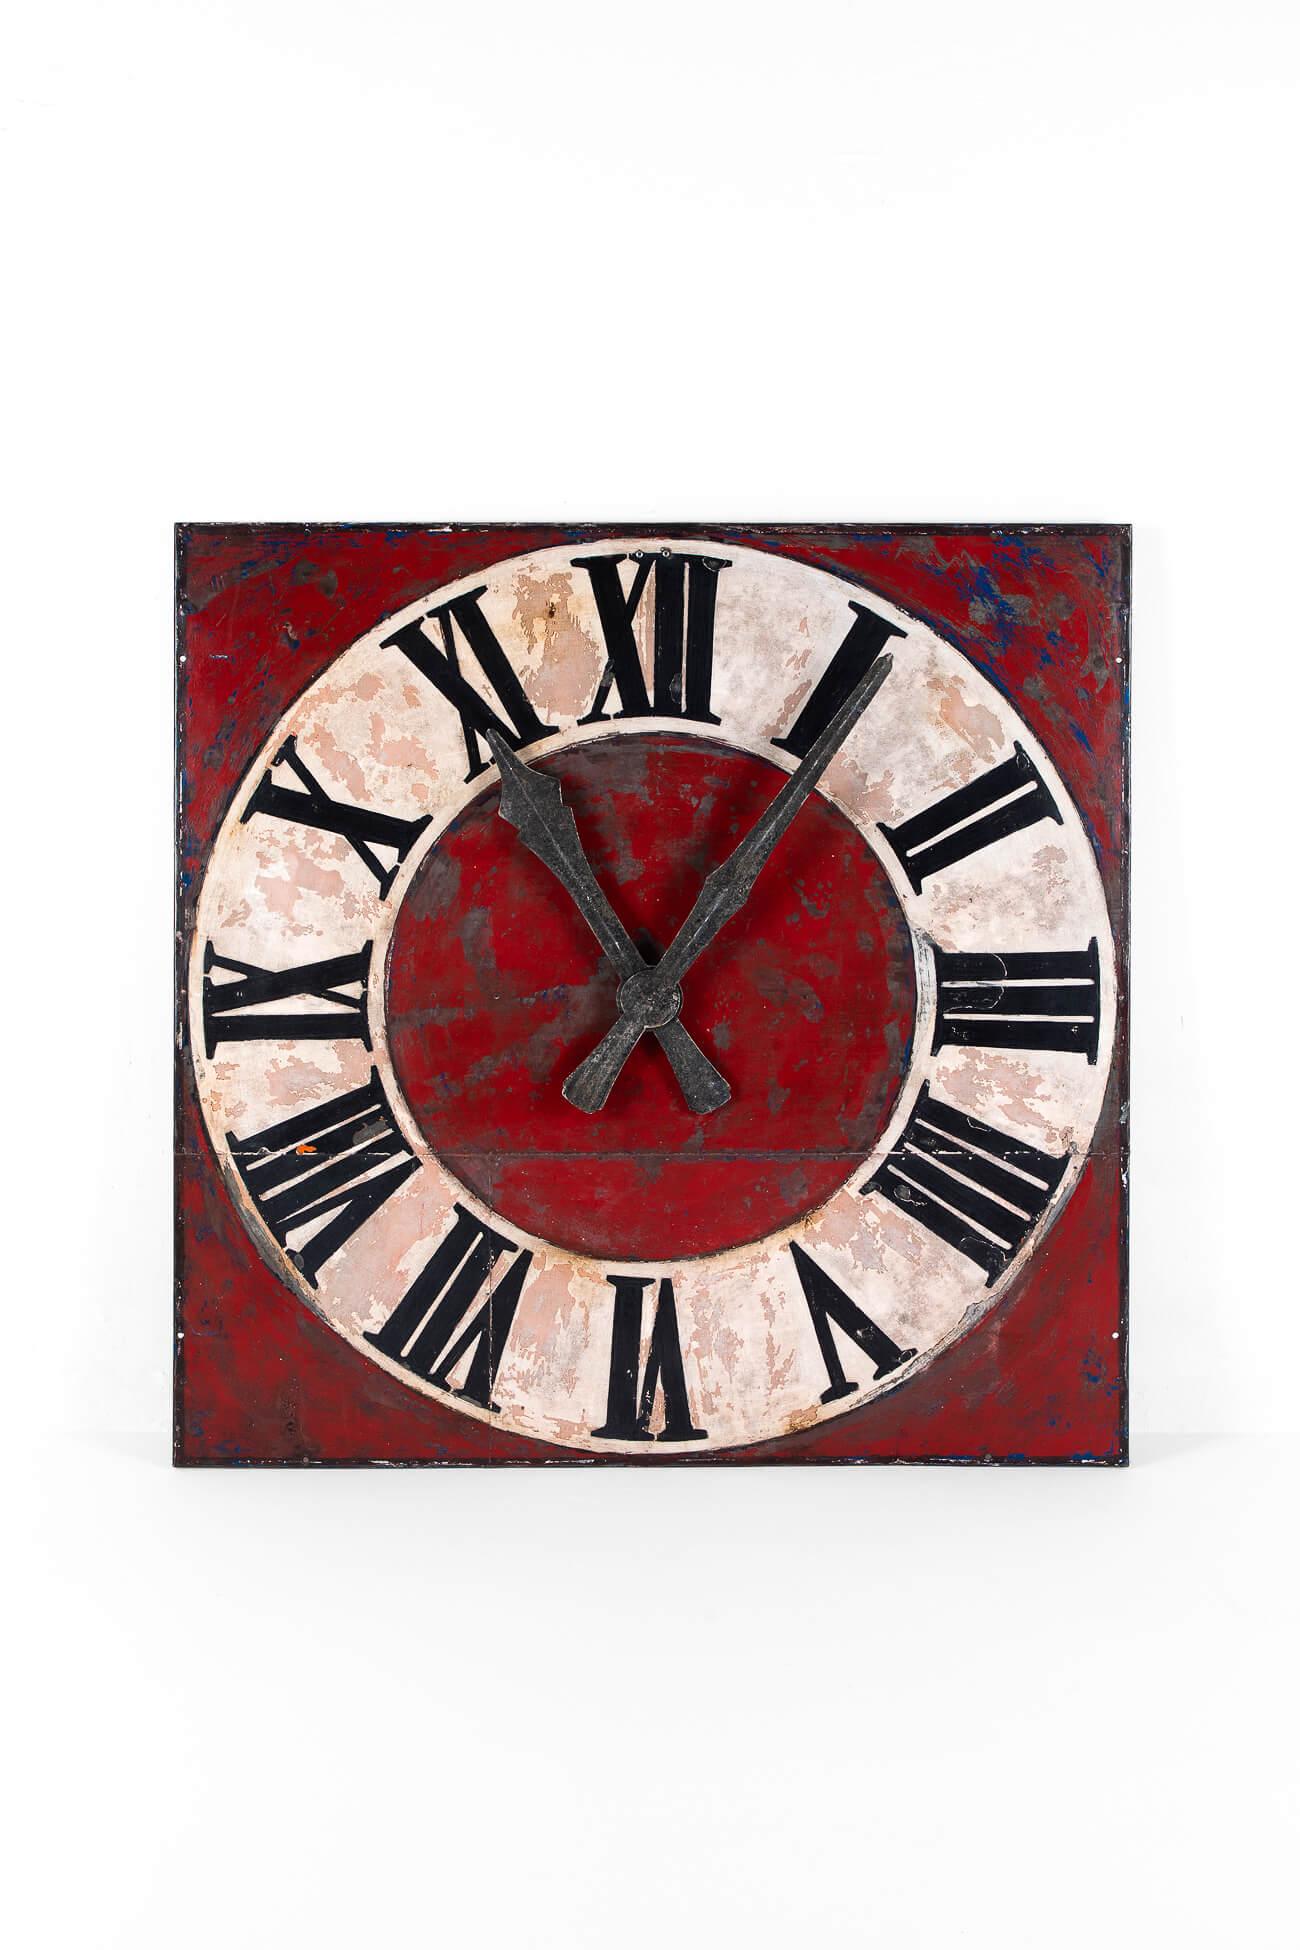 A monumental church clockface from a chapel in northern France.

The dial on the face is hand-painted in black, white, and red, the colours fading over time to create the most wonderful patina.

This clock face was removed from the chapel clock